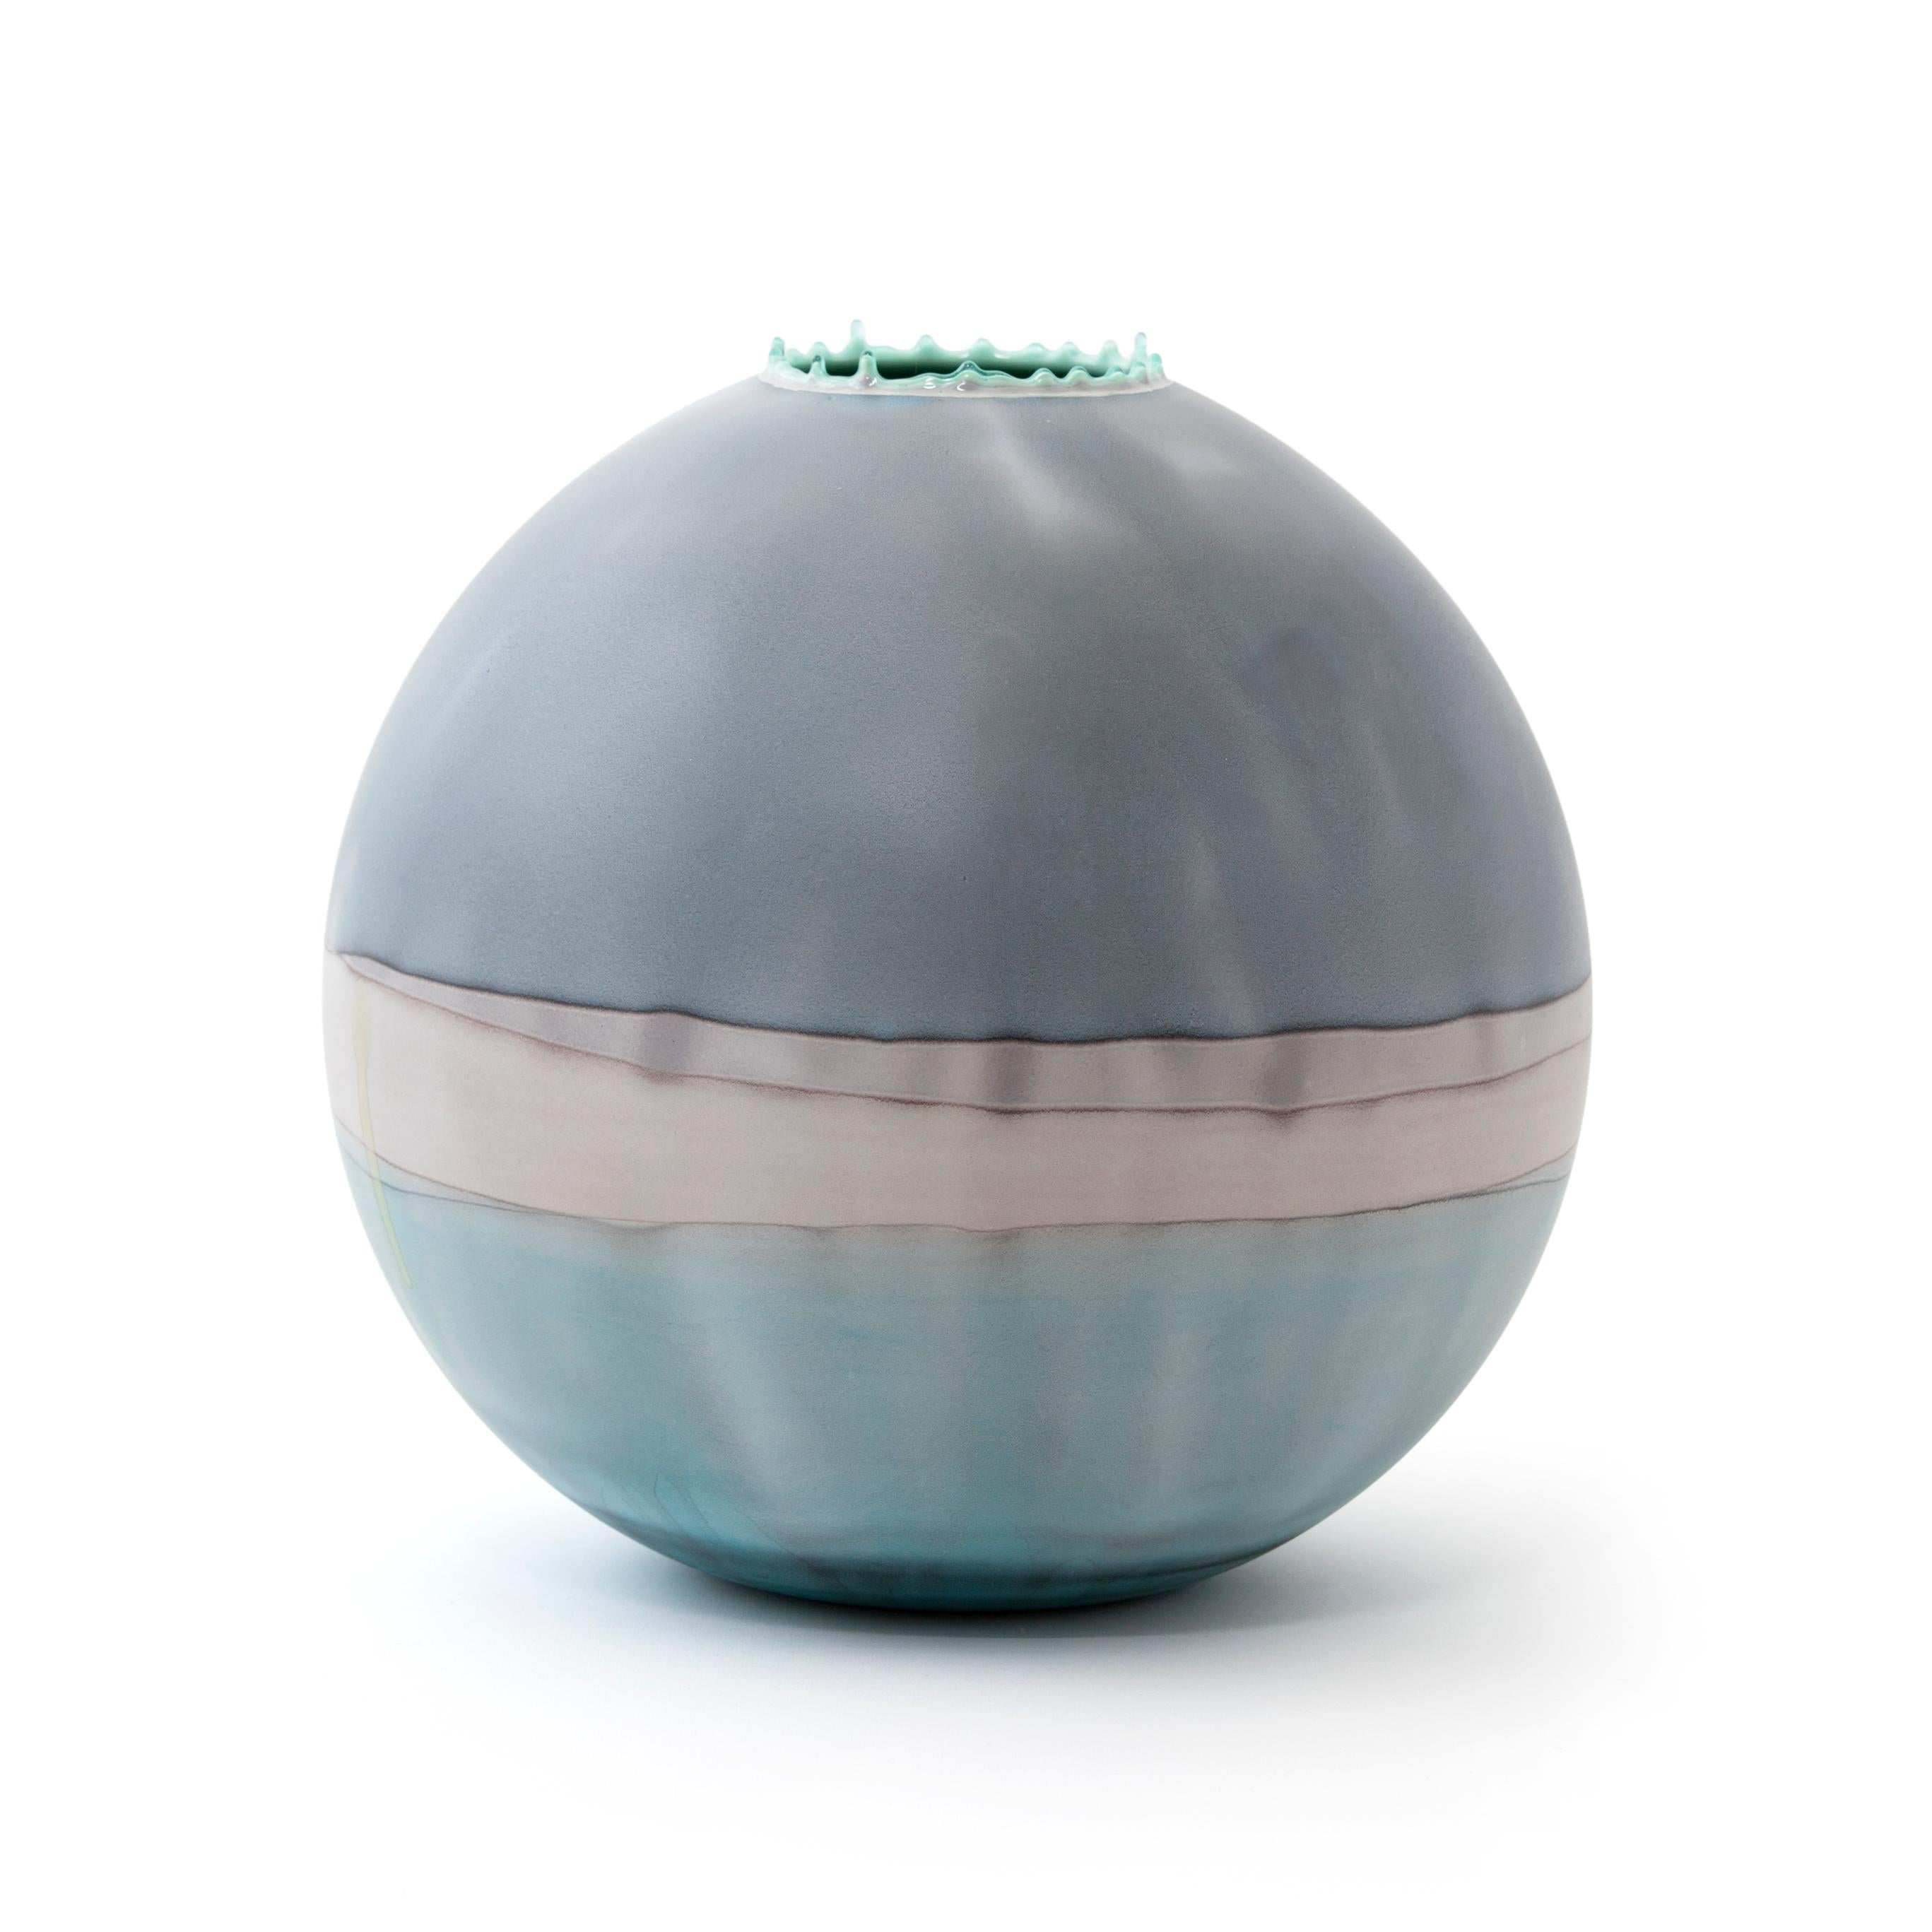 Slate blue Jupiter vase by Elyse Graham.
Dimensions: W 28 x D 28 x H 30.5 cm.
Materials: plaster, resin.
Molded, dyed, and finished by hand in la. Customization.
Available.
All pieces are made to order.

This collection of vessels is inspired